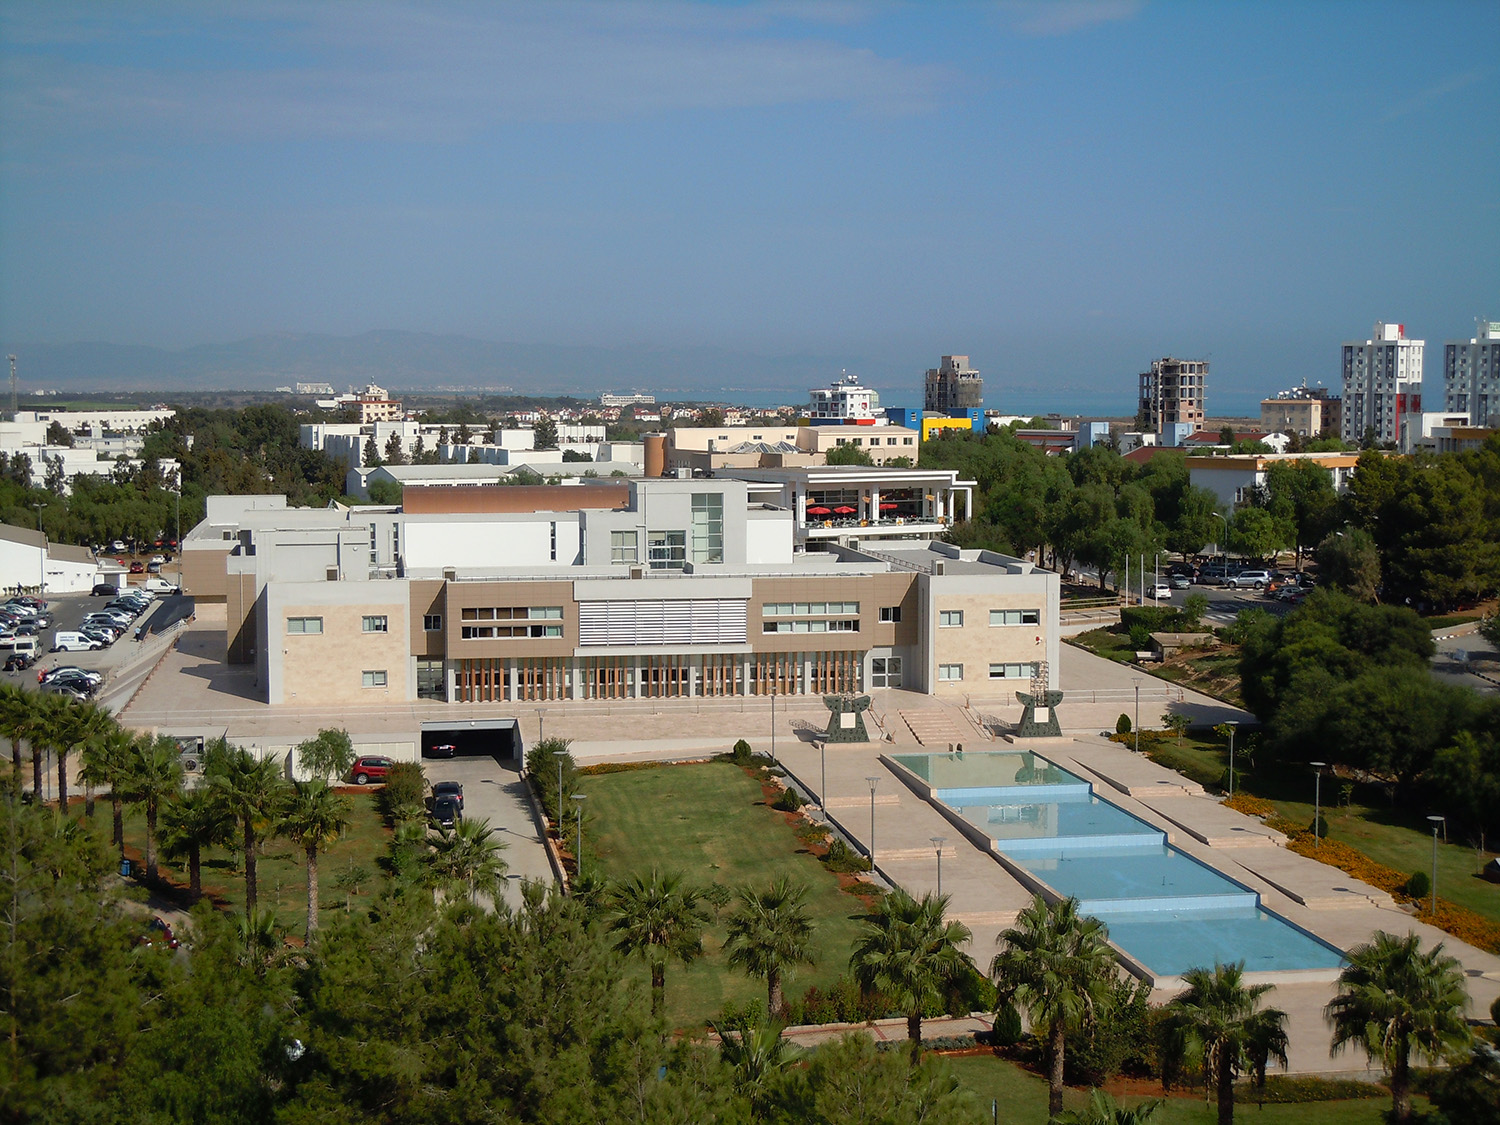 Administrative core with neighbouring campus buildings